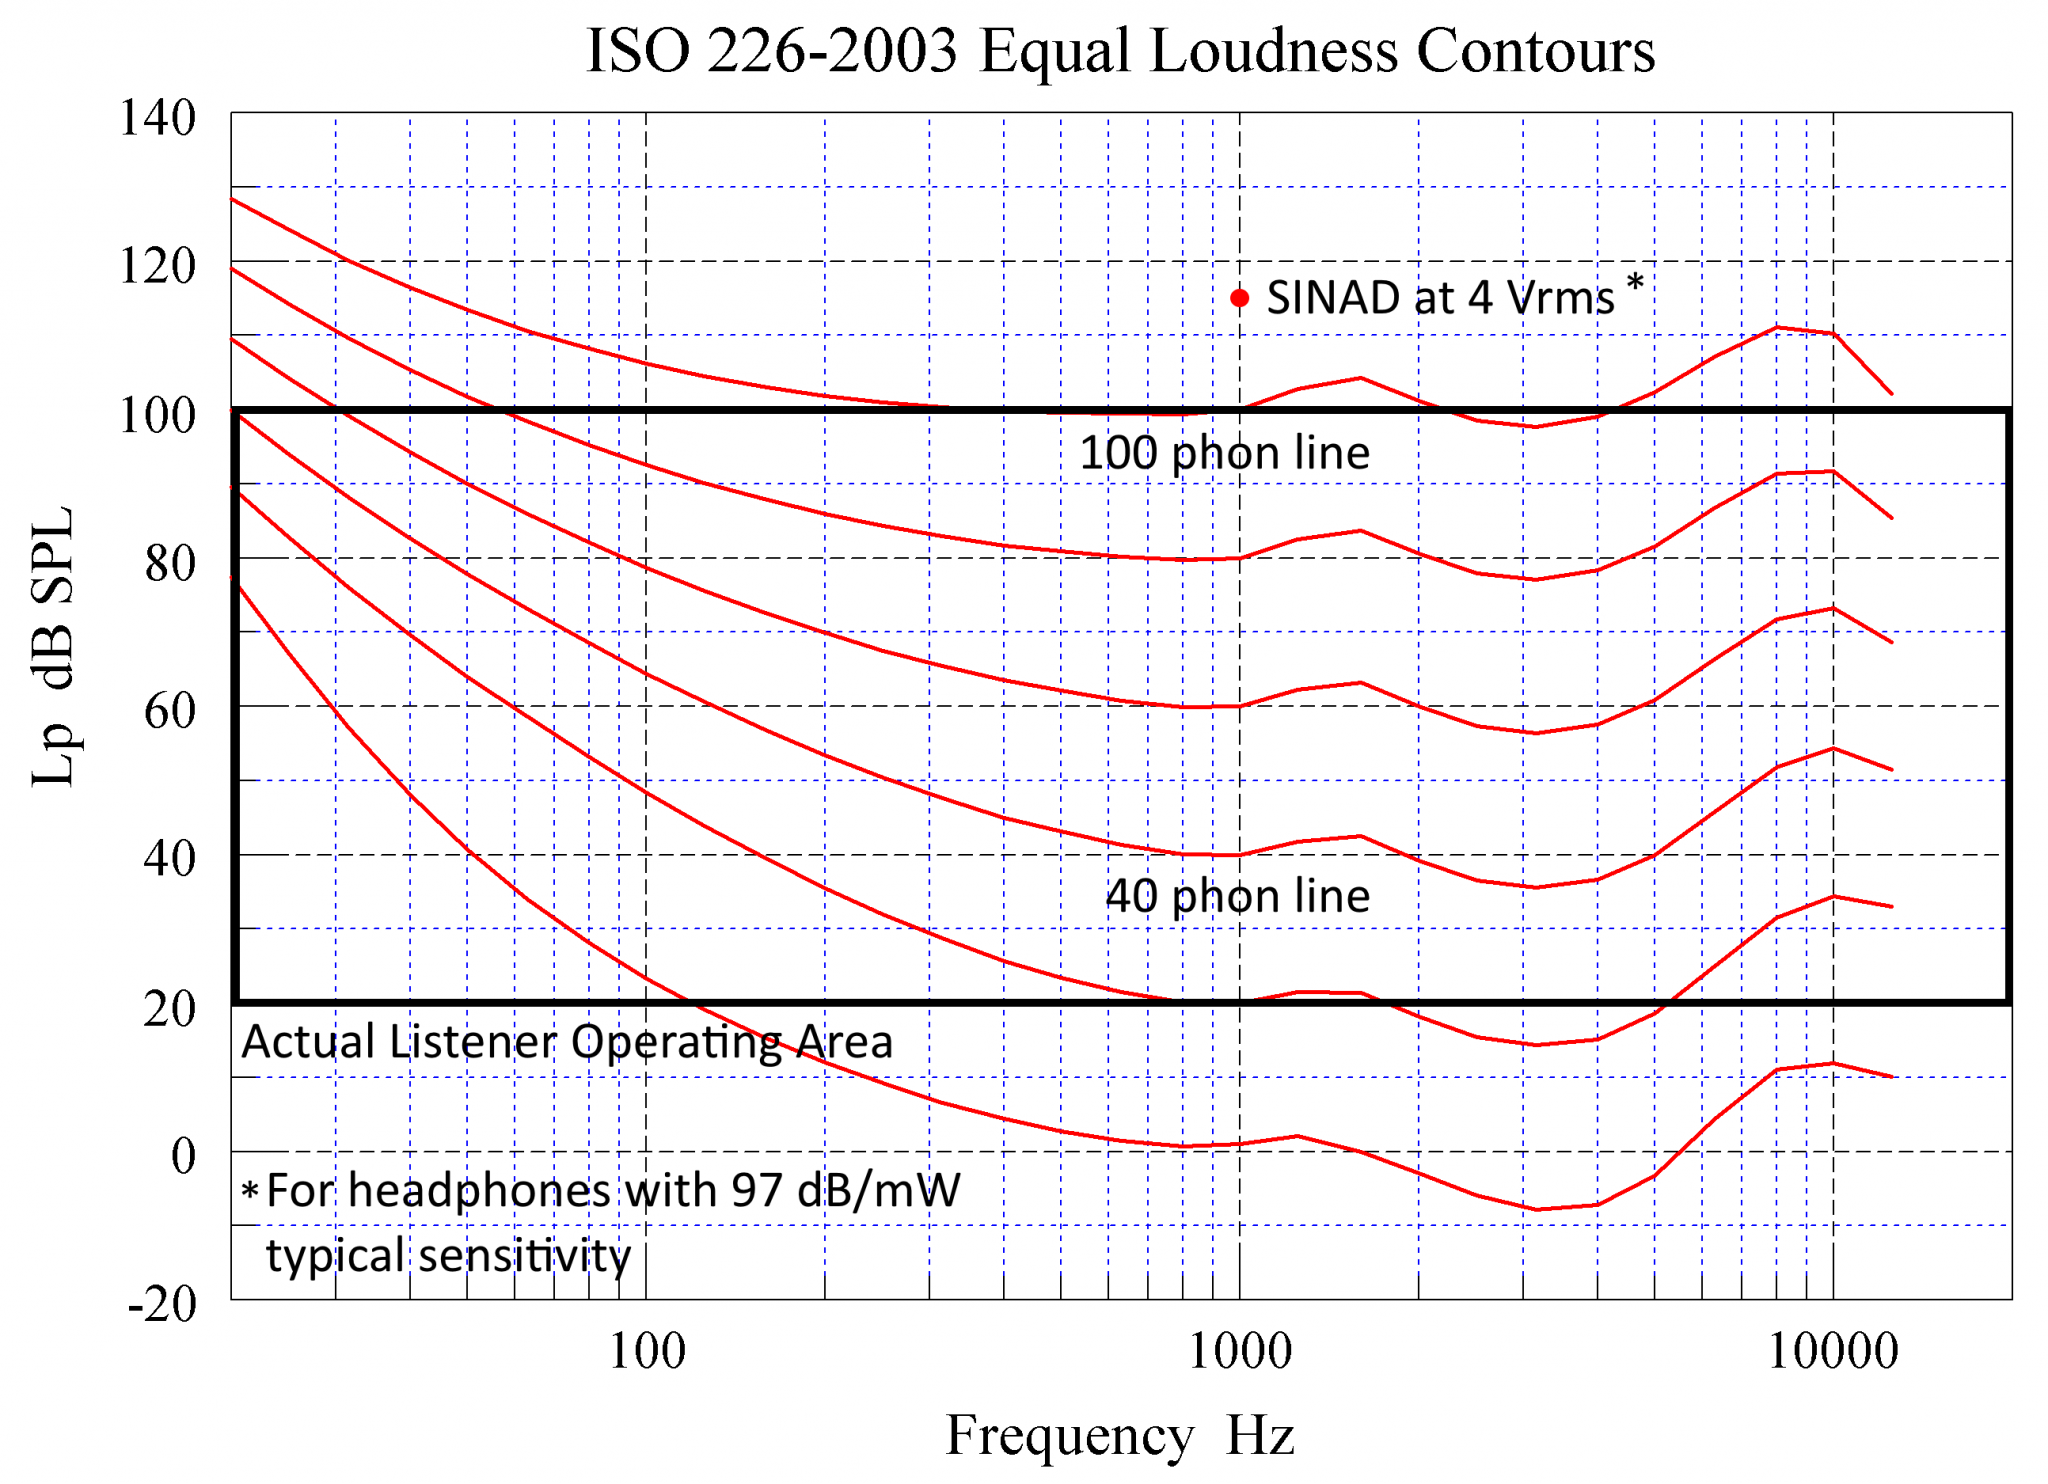 iso226-2003 Equal Loudness Contours v2 - annotated - cropped.png